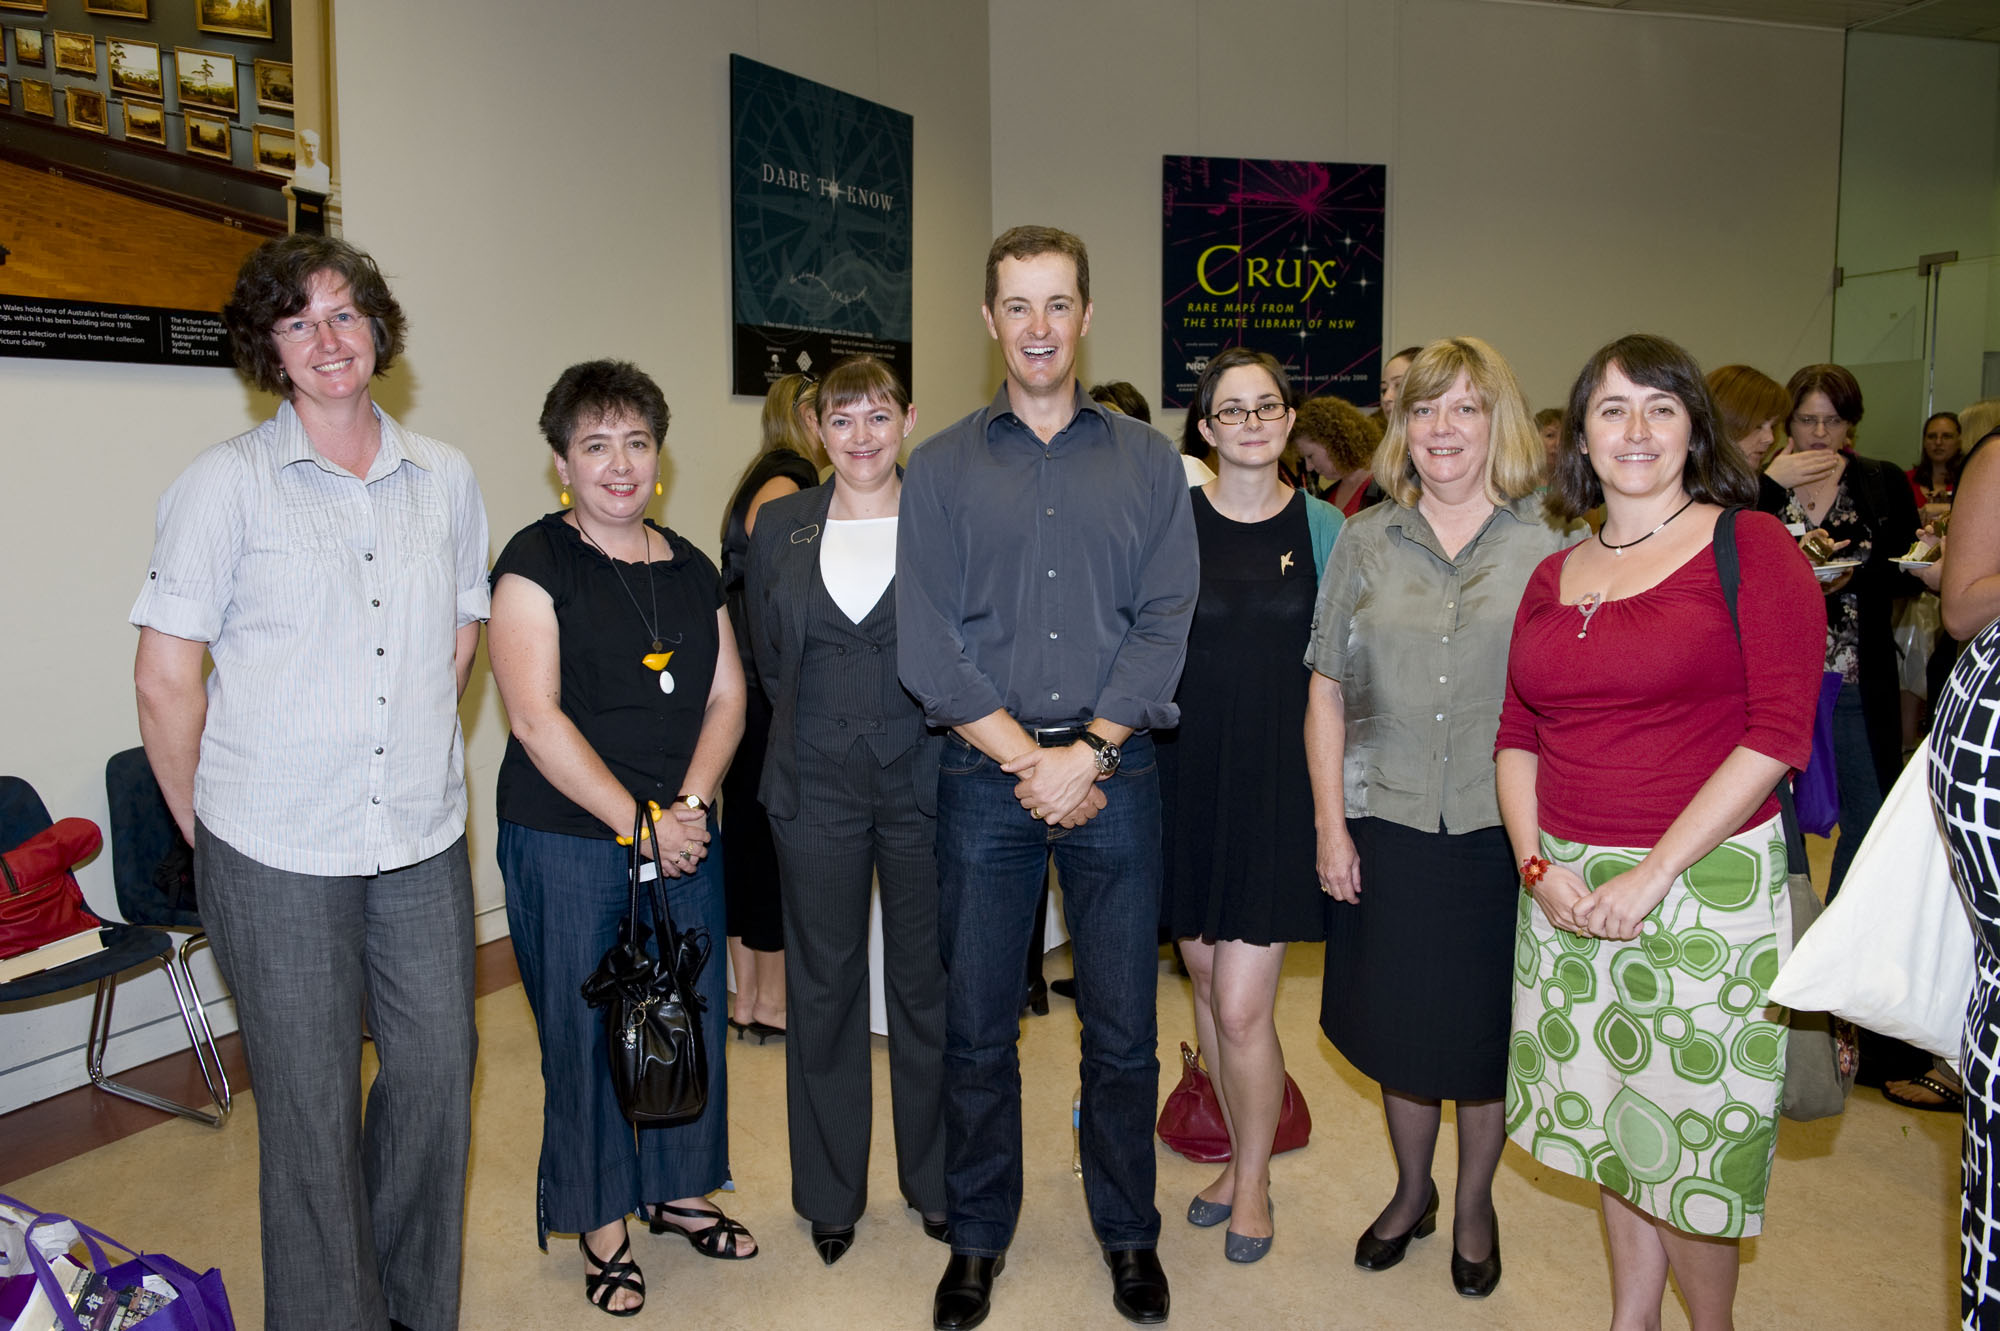 Showing the organisers of the day with Matthew Reilly